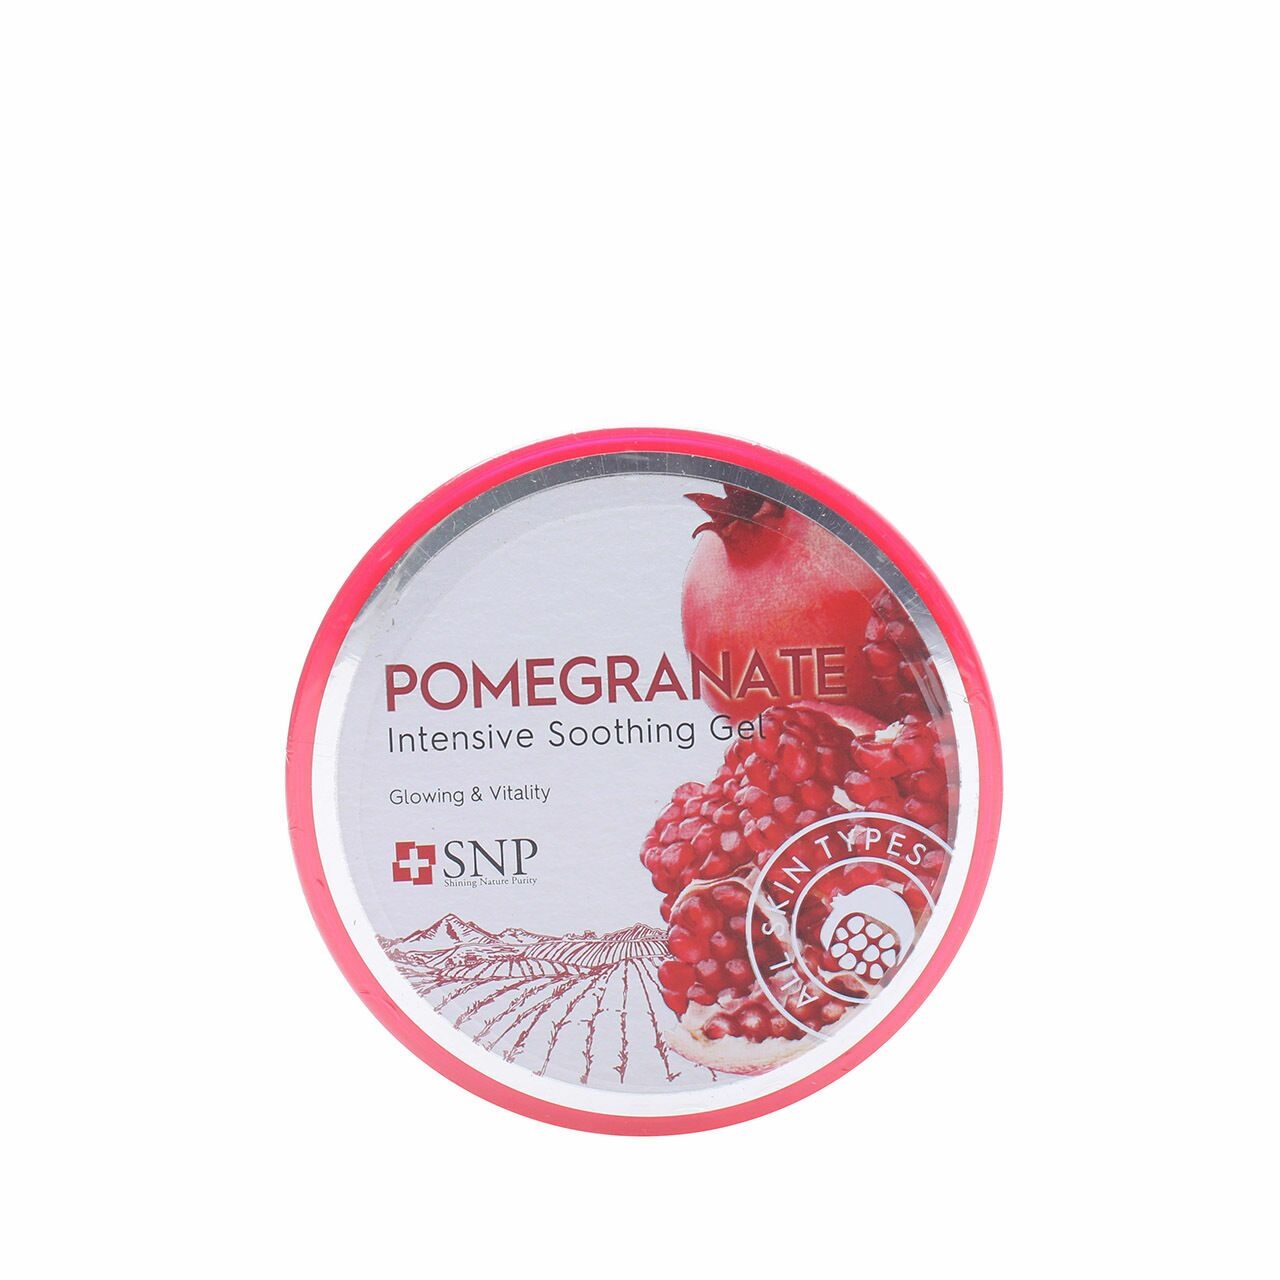 Private Collection Pomegranate insentive sooting gel Skin Care